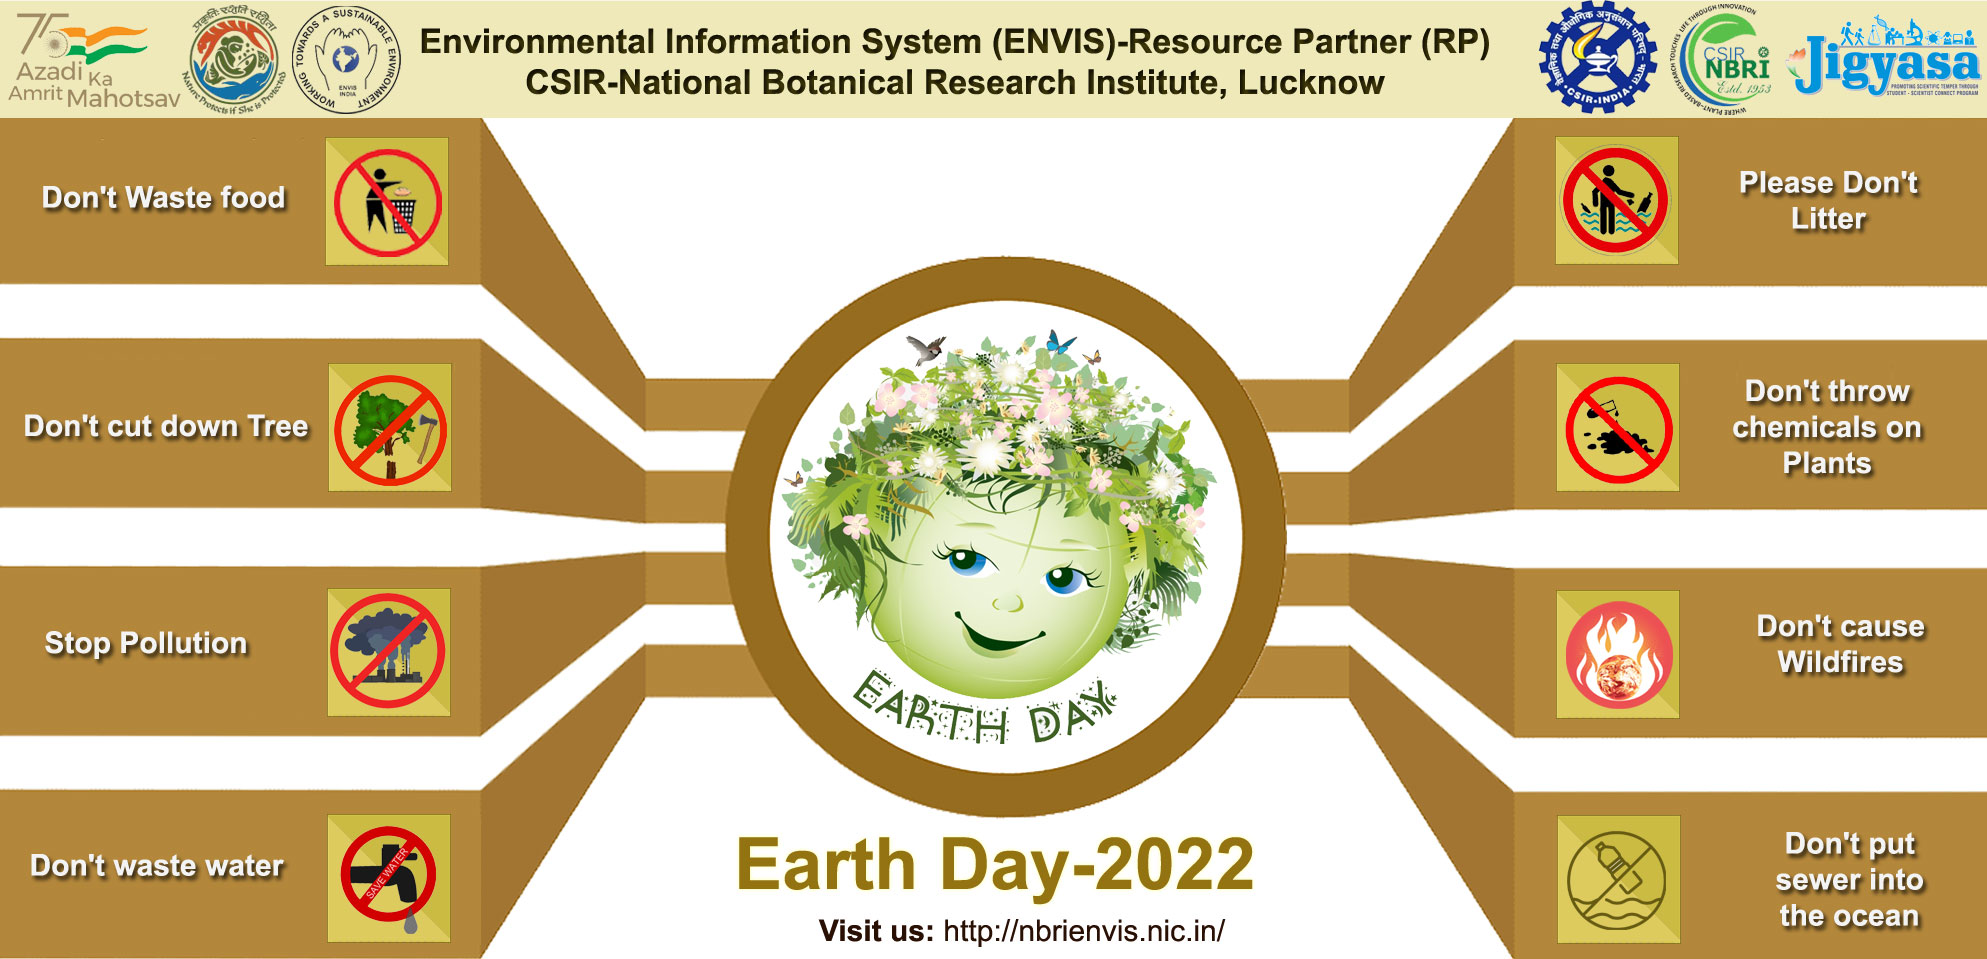 ENVIS-RP-NBRI Celebrated “Earth Day-2022”